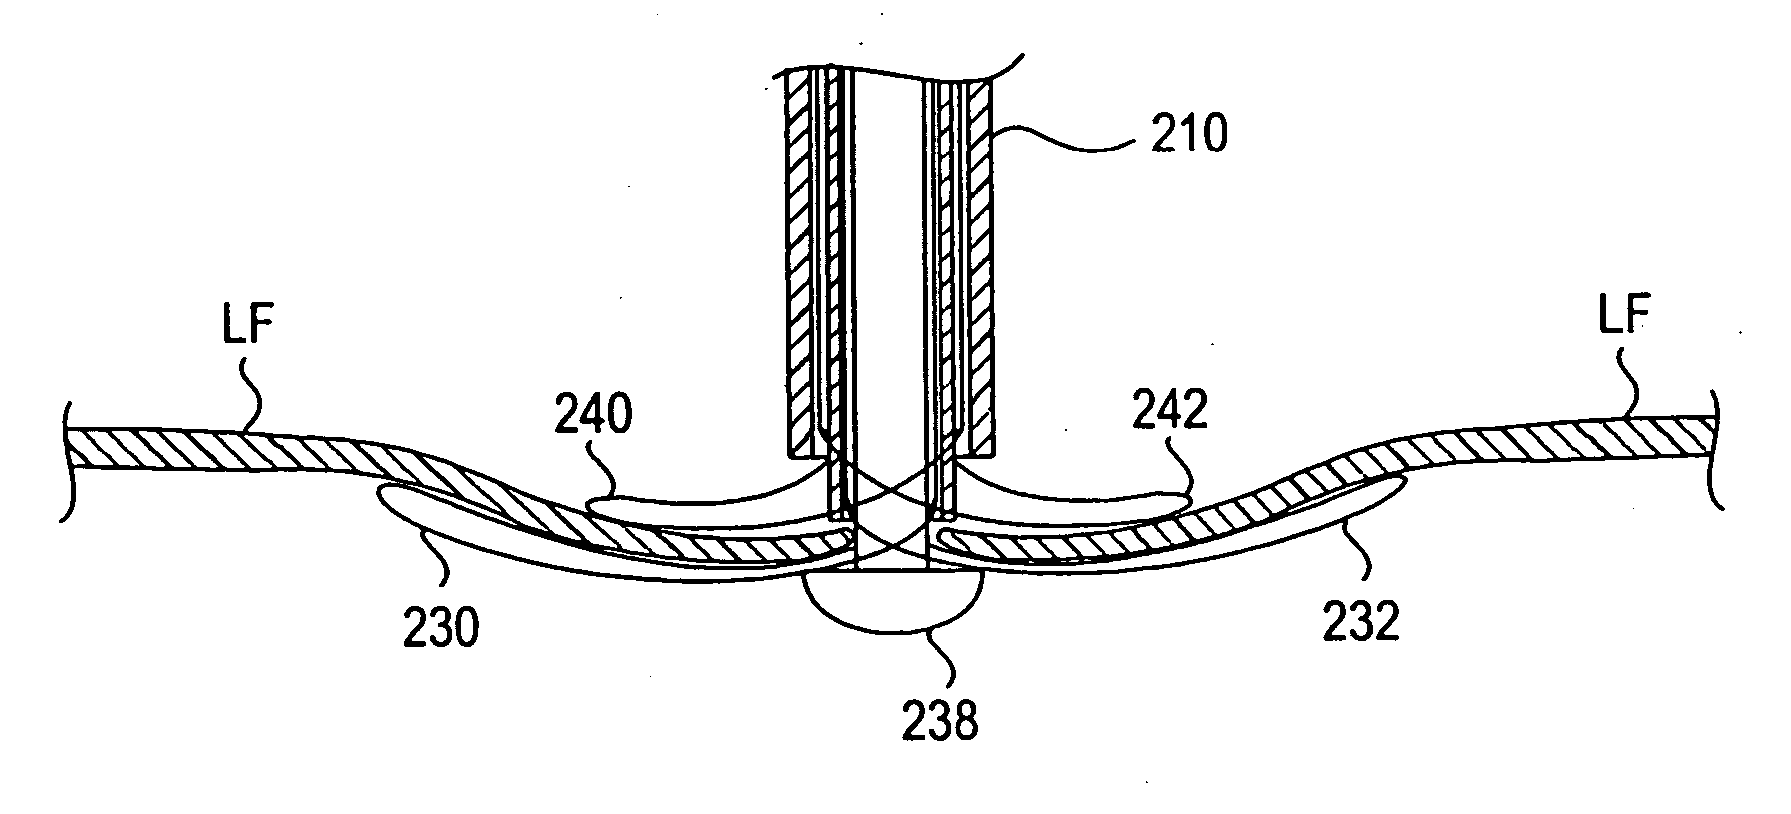 Methods and devices for capturing and fixing leaflets in valve repair